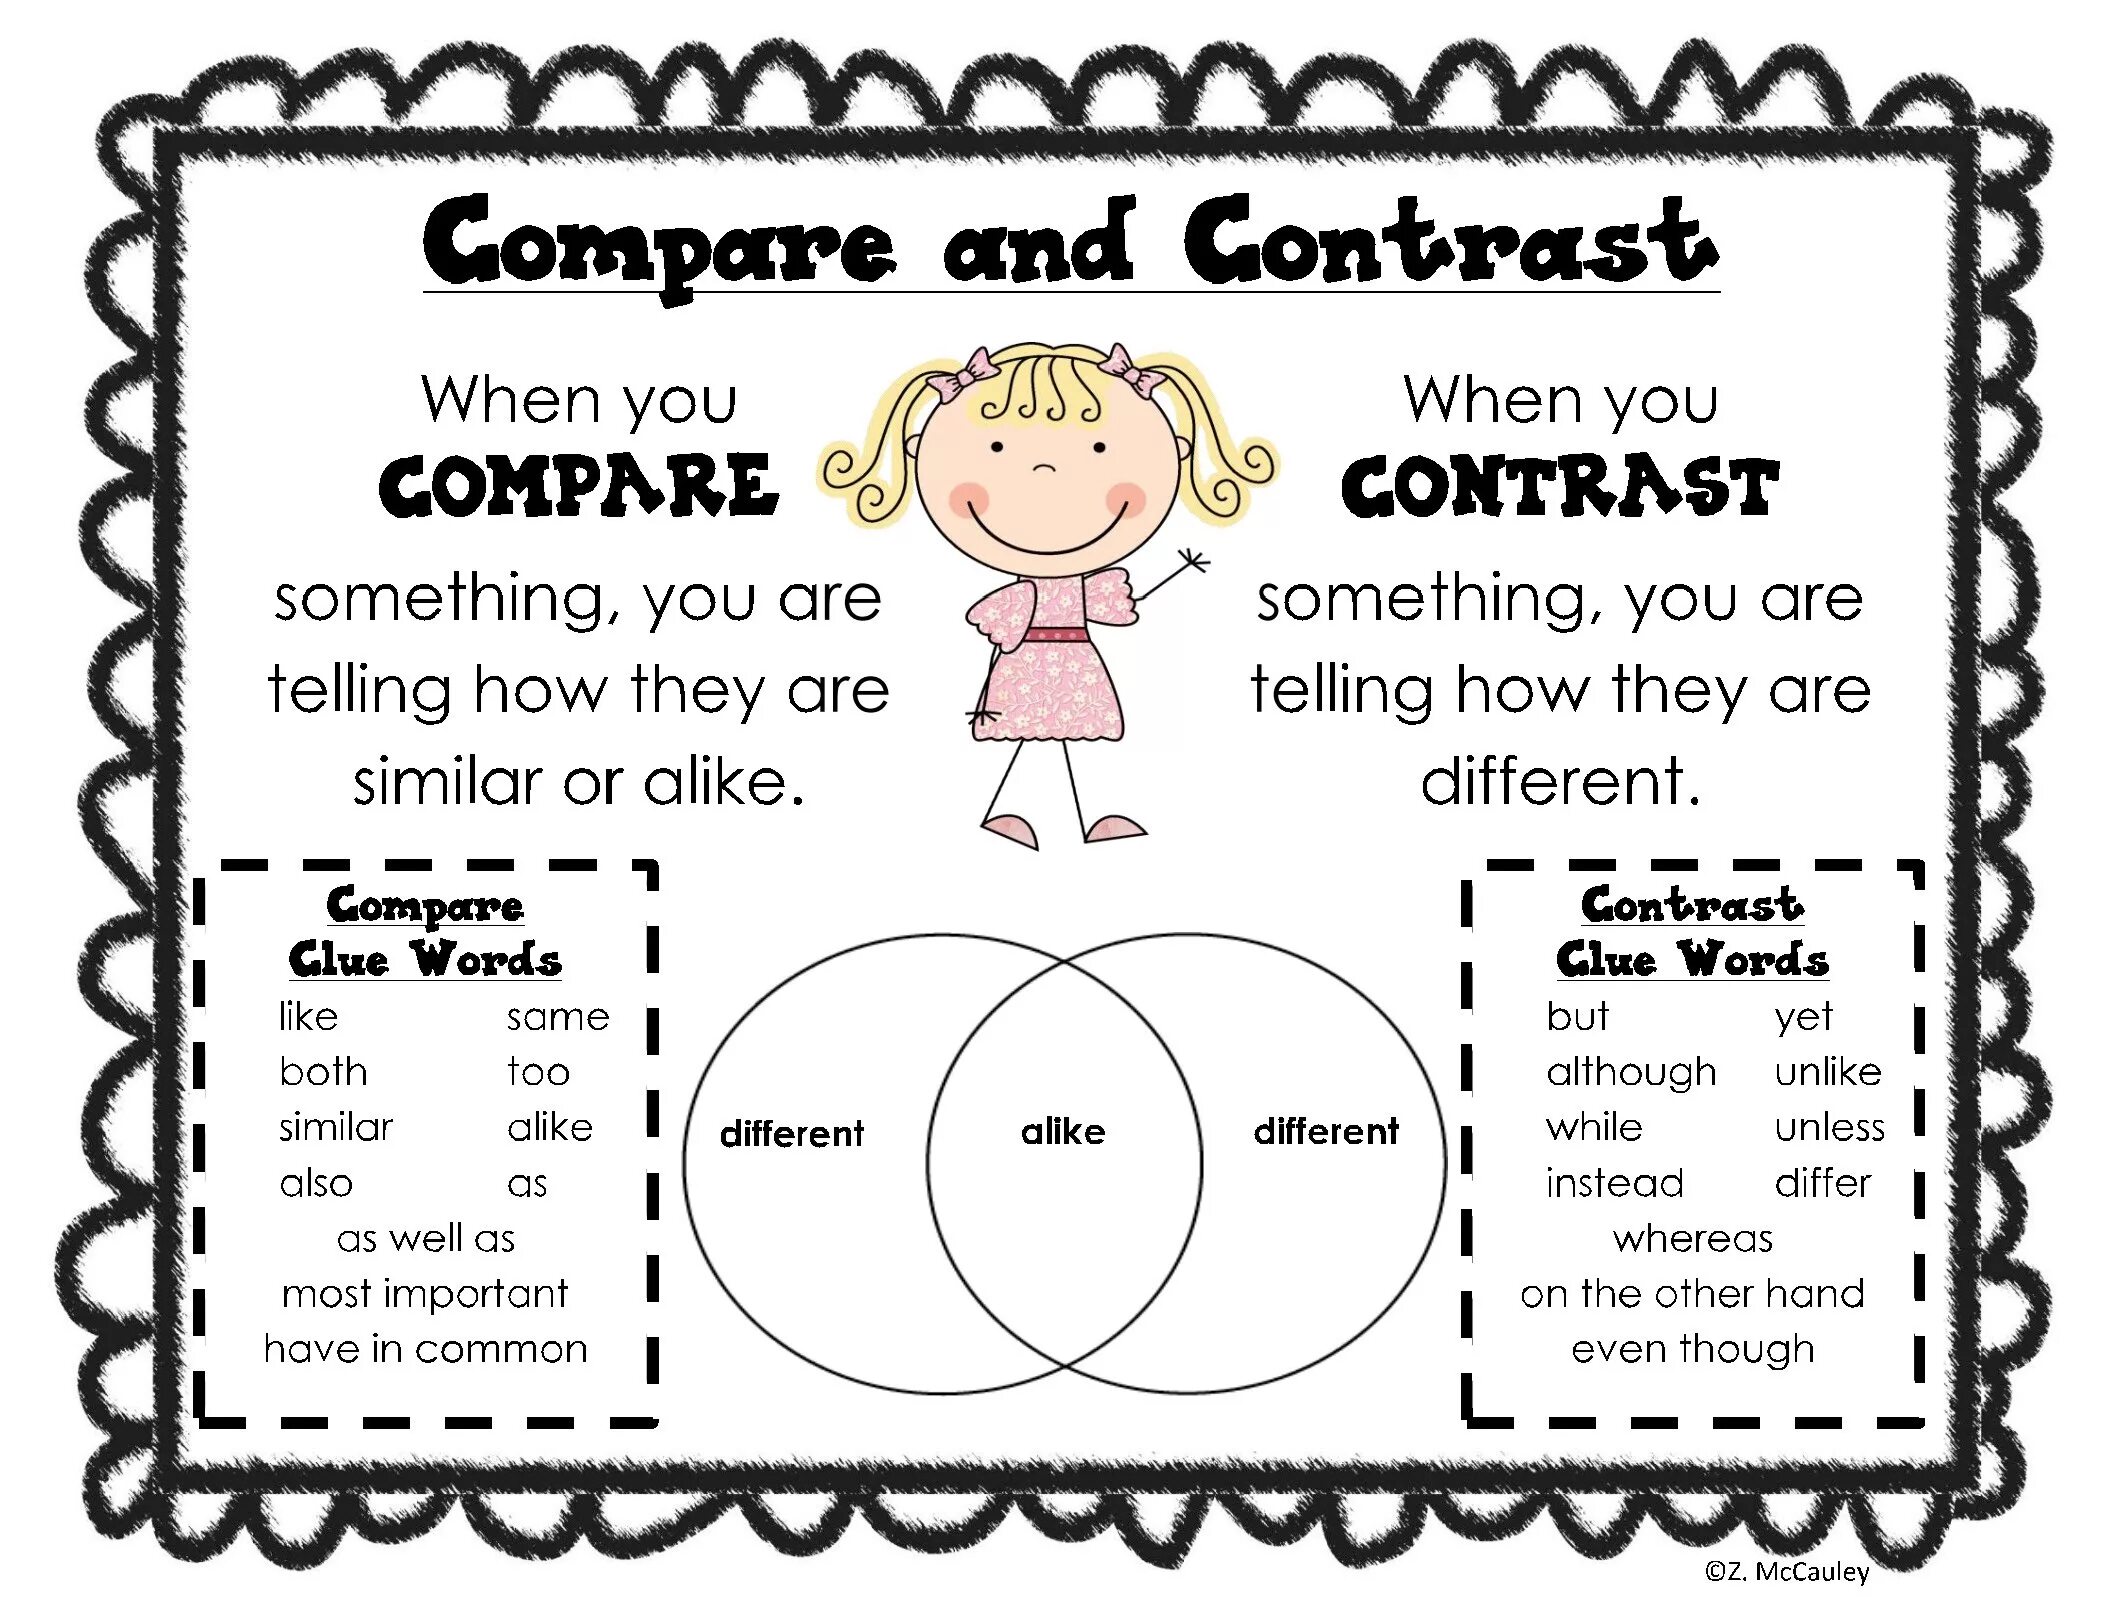 Something similar. Compare and contrast. Comparisons and contrasts. Compare and contrast Worksheets. Compare and contrast Worksheets for Kids.